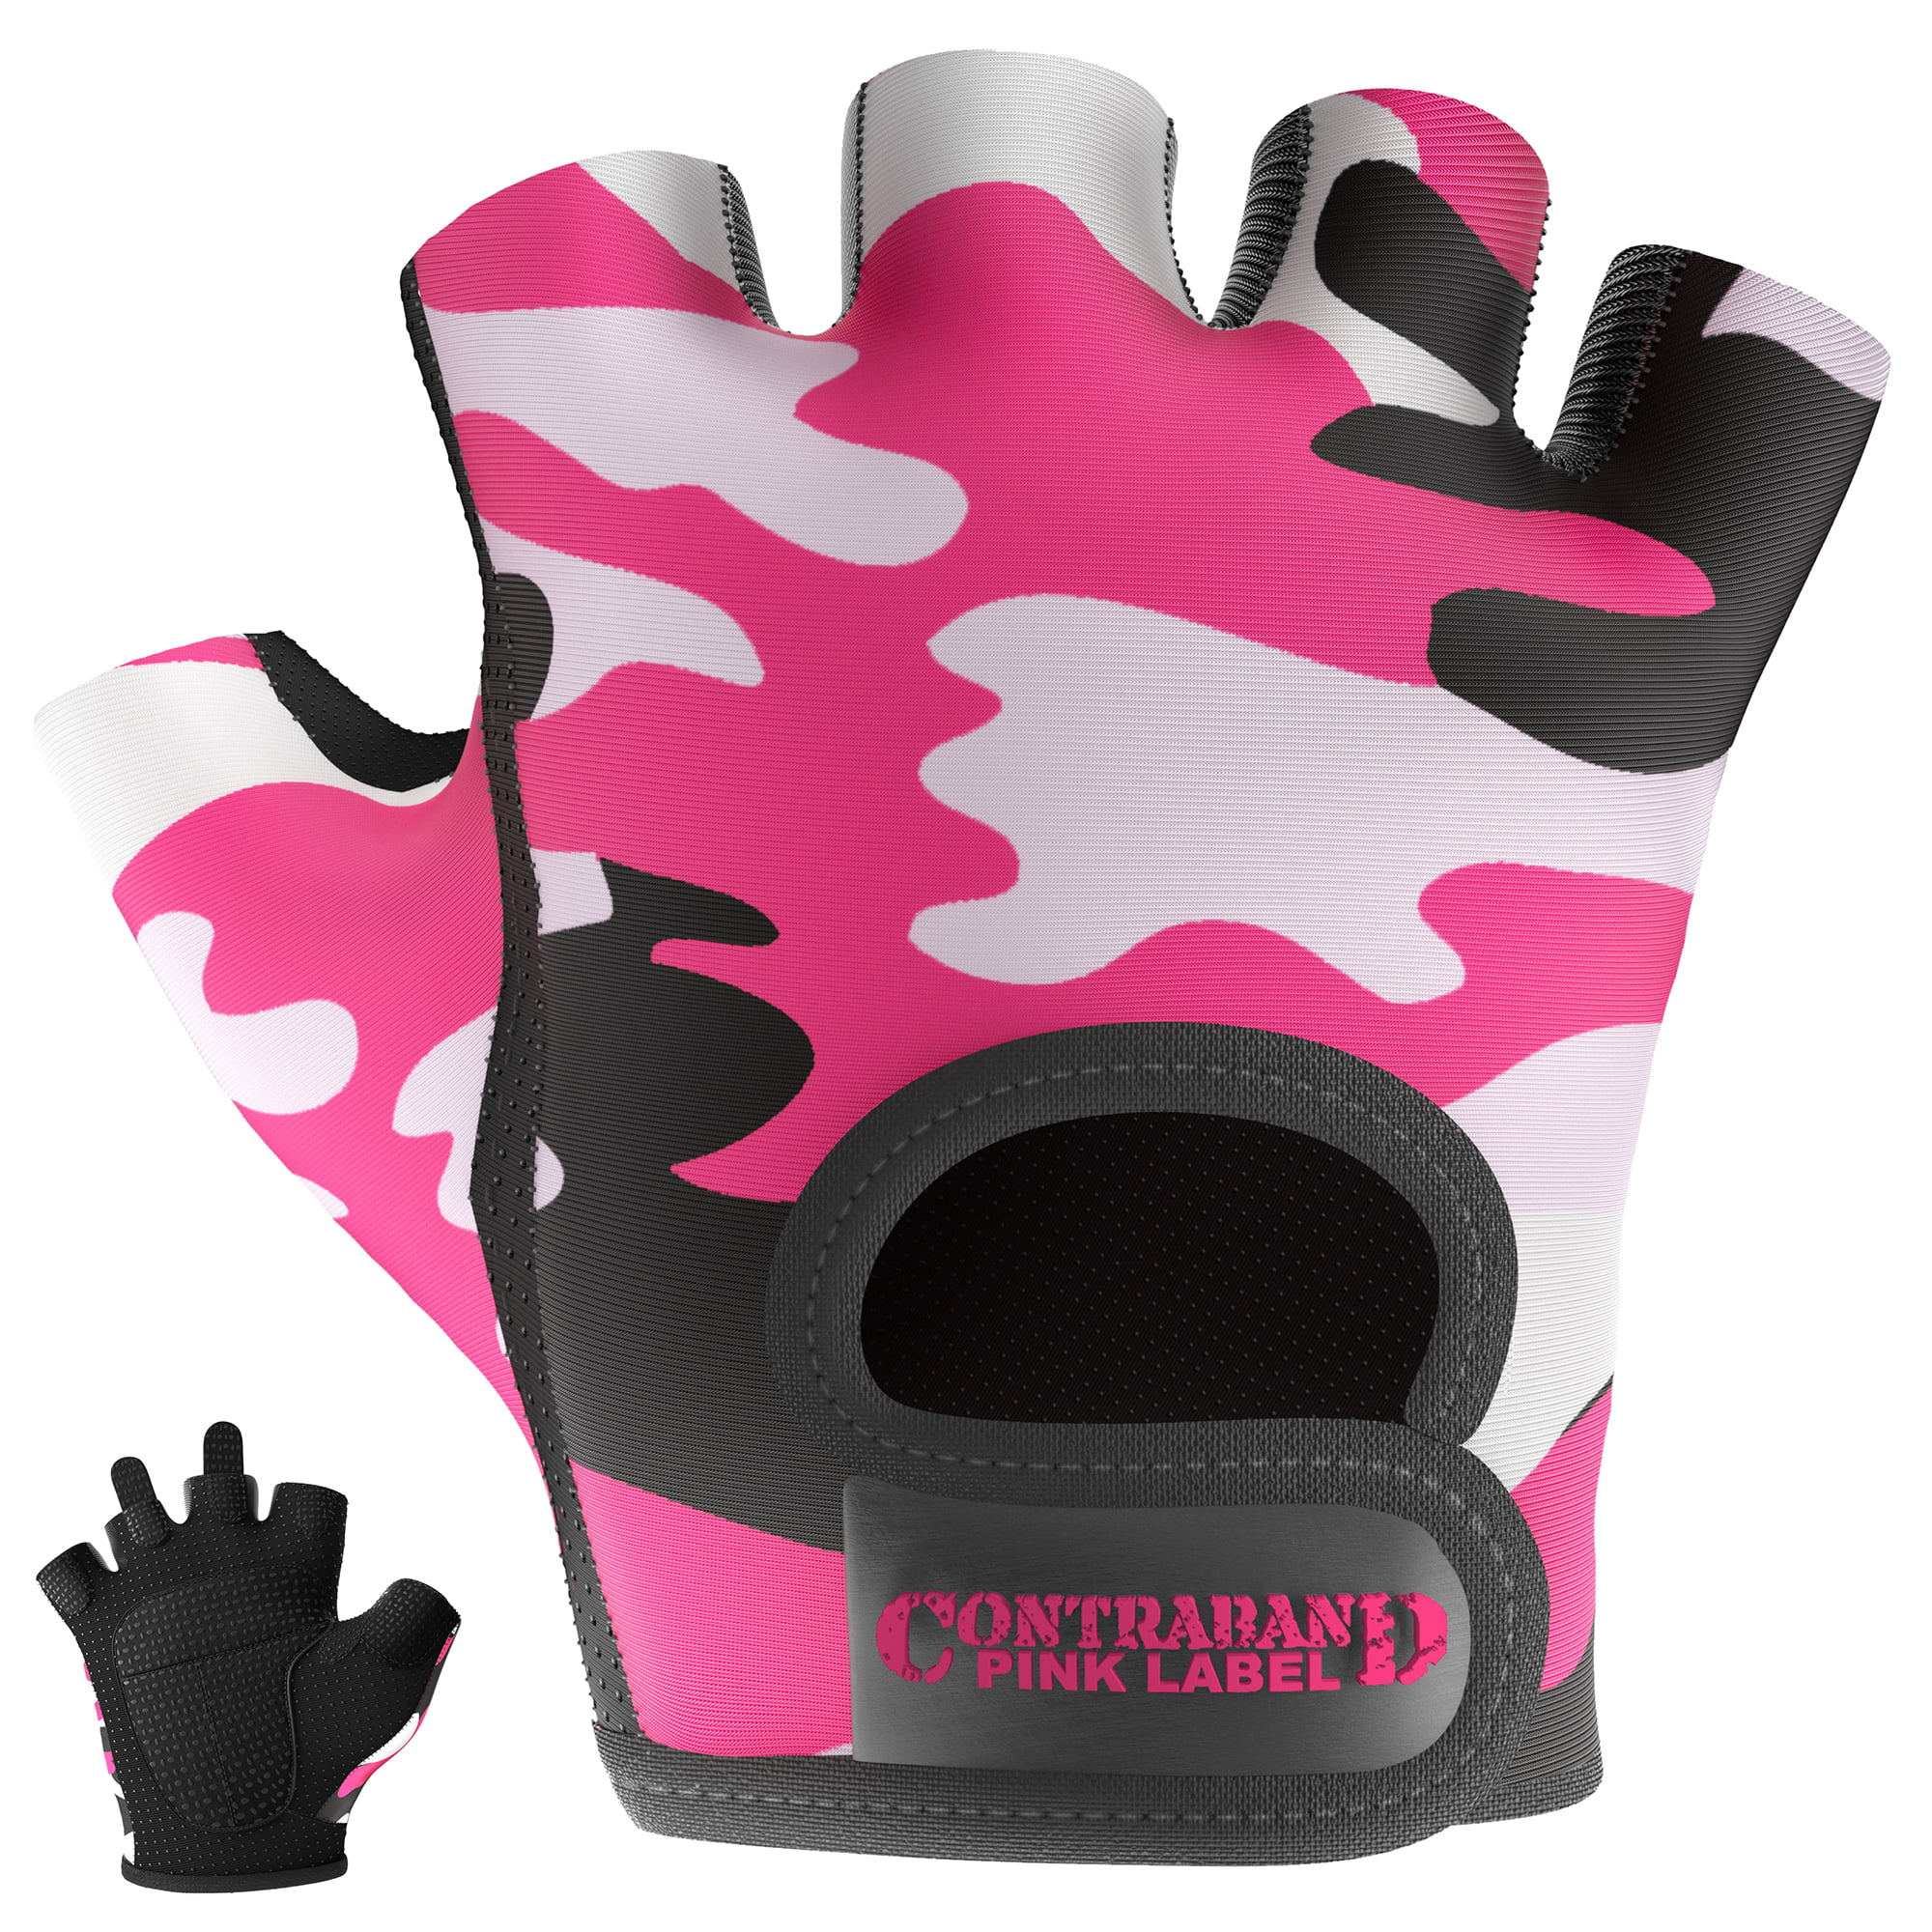 PAIR CLEARANCE 50% OFF Contraband Pink Label 5297 Leopard Print Lifting Gloves 